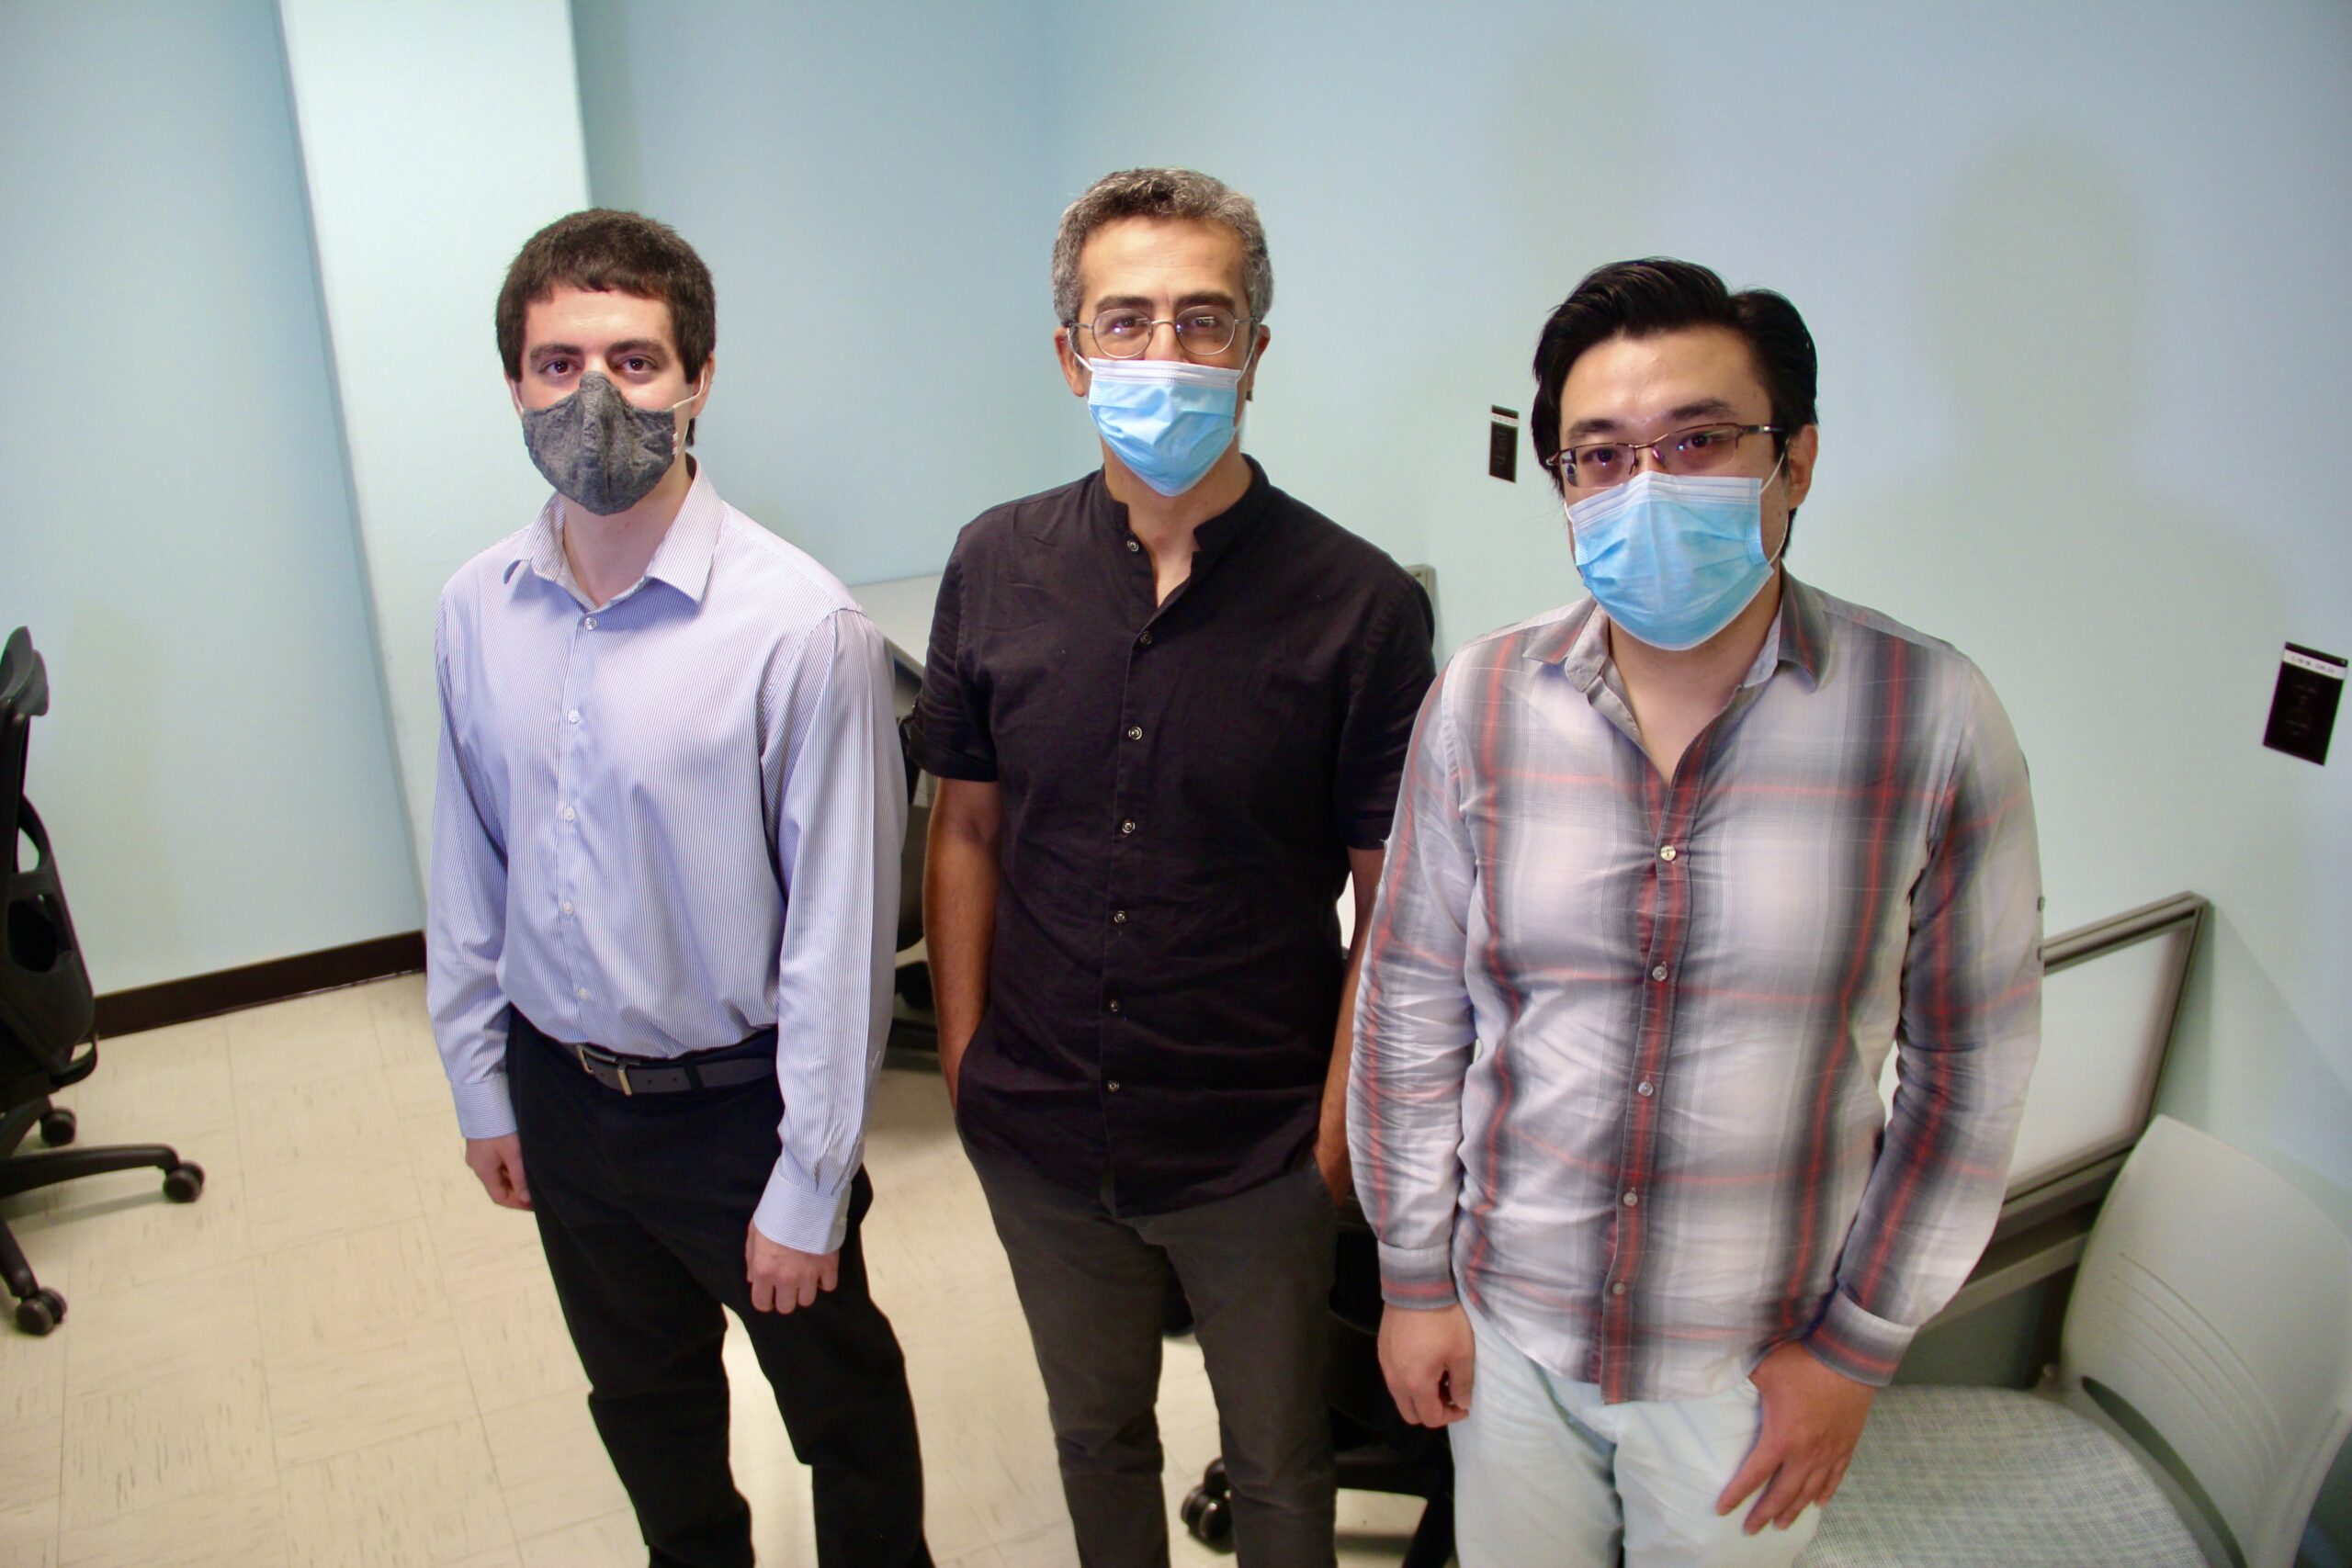 Uzay Emir stands with his doctoral students Xin Shen and Nicholas Farley